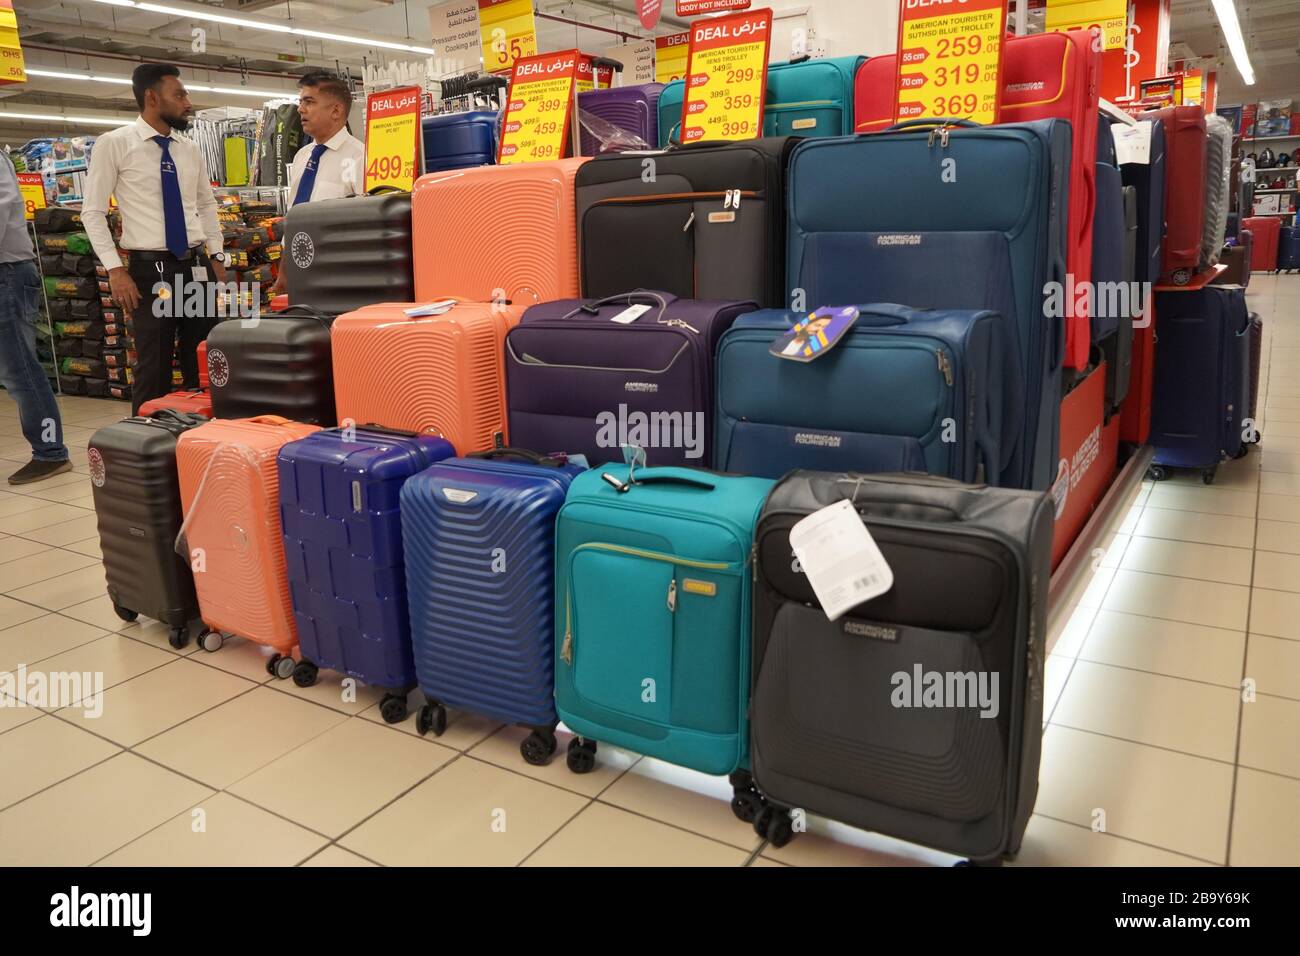 Department store interior view with luggage zone. Multicolored